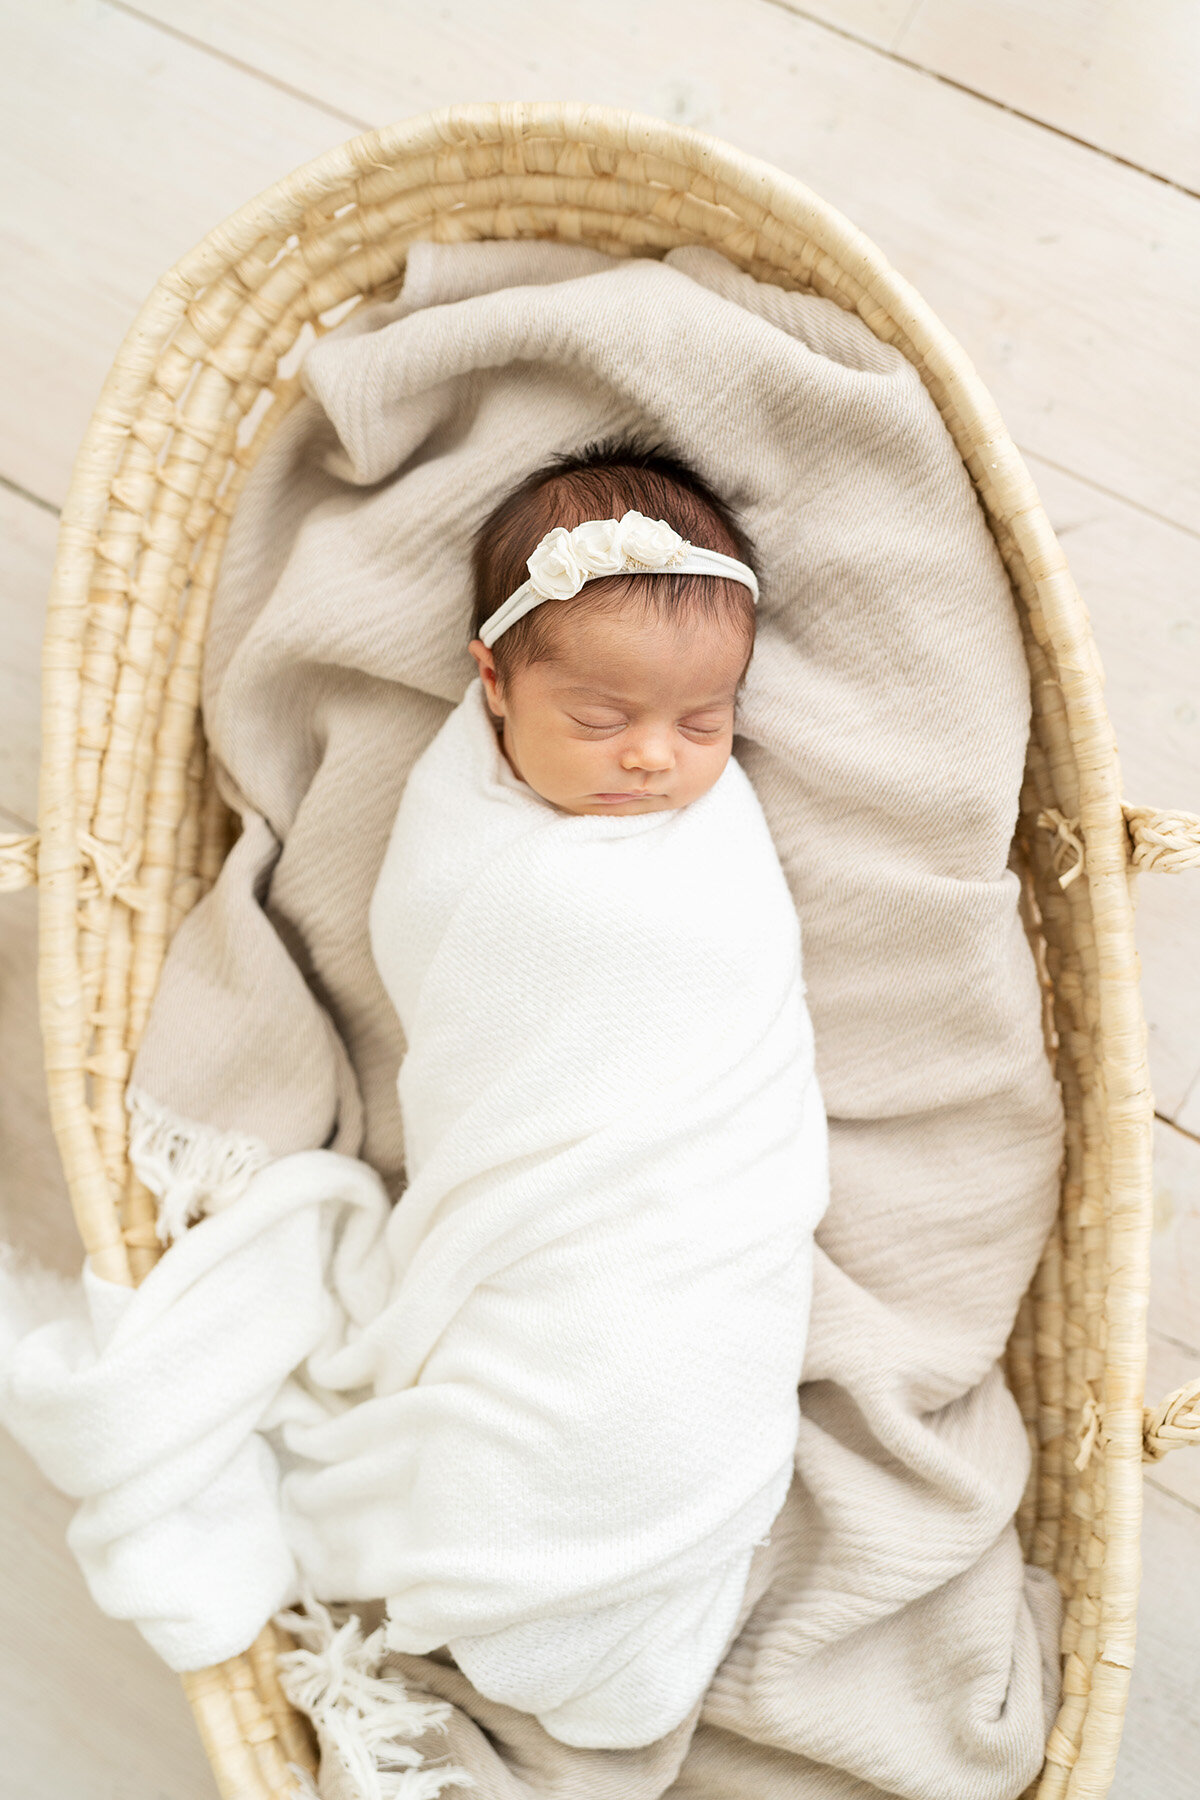 Baby sleeping in Moses basket while swaddled in white fabric